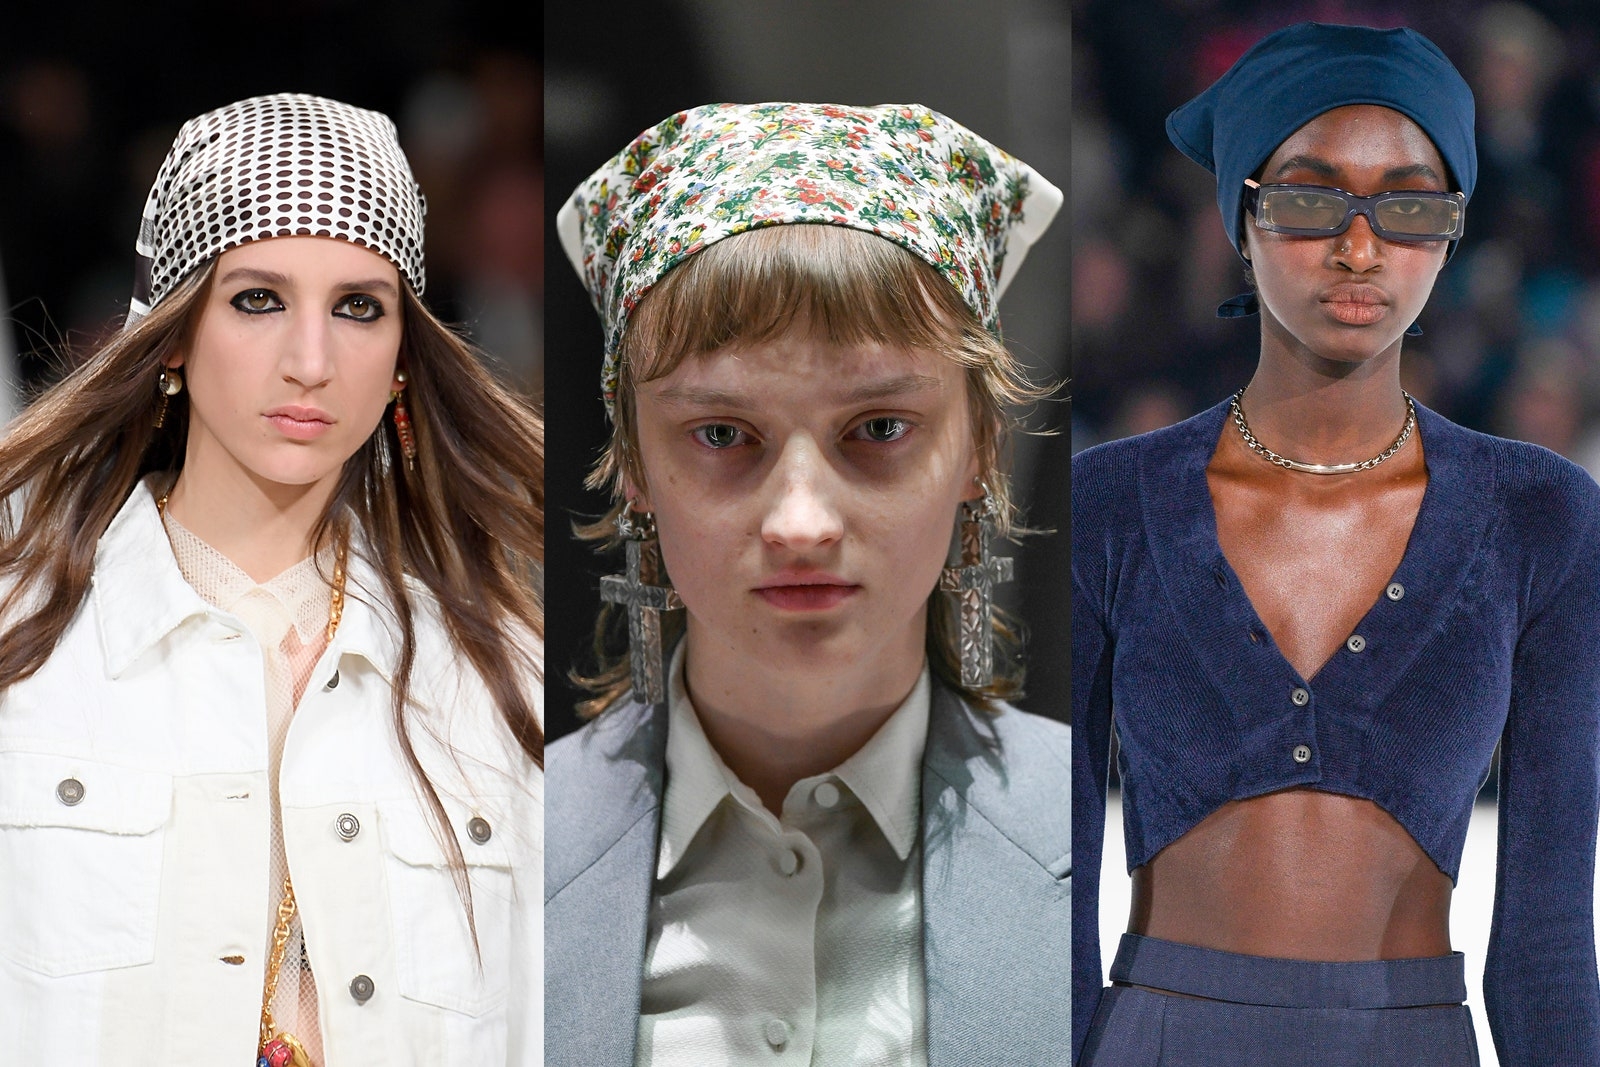 Top 10 Fashion Trends from Spring/Summer 2021 Fashion Weeks